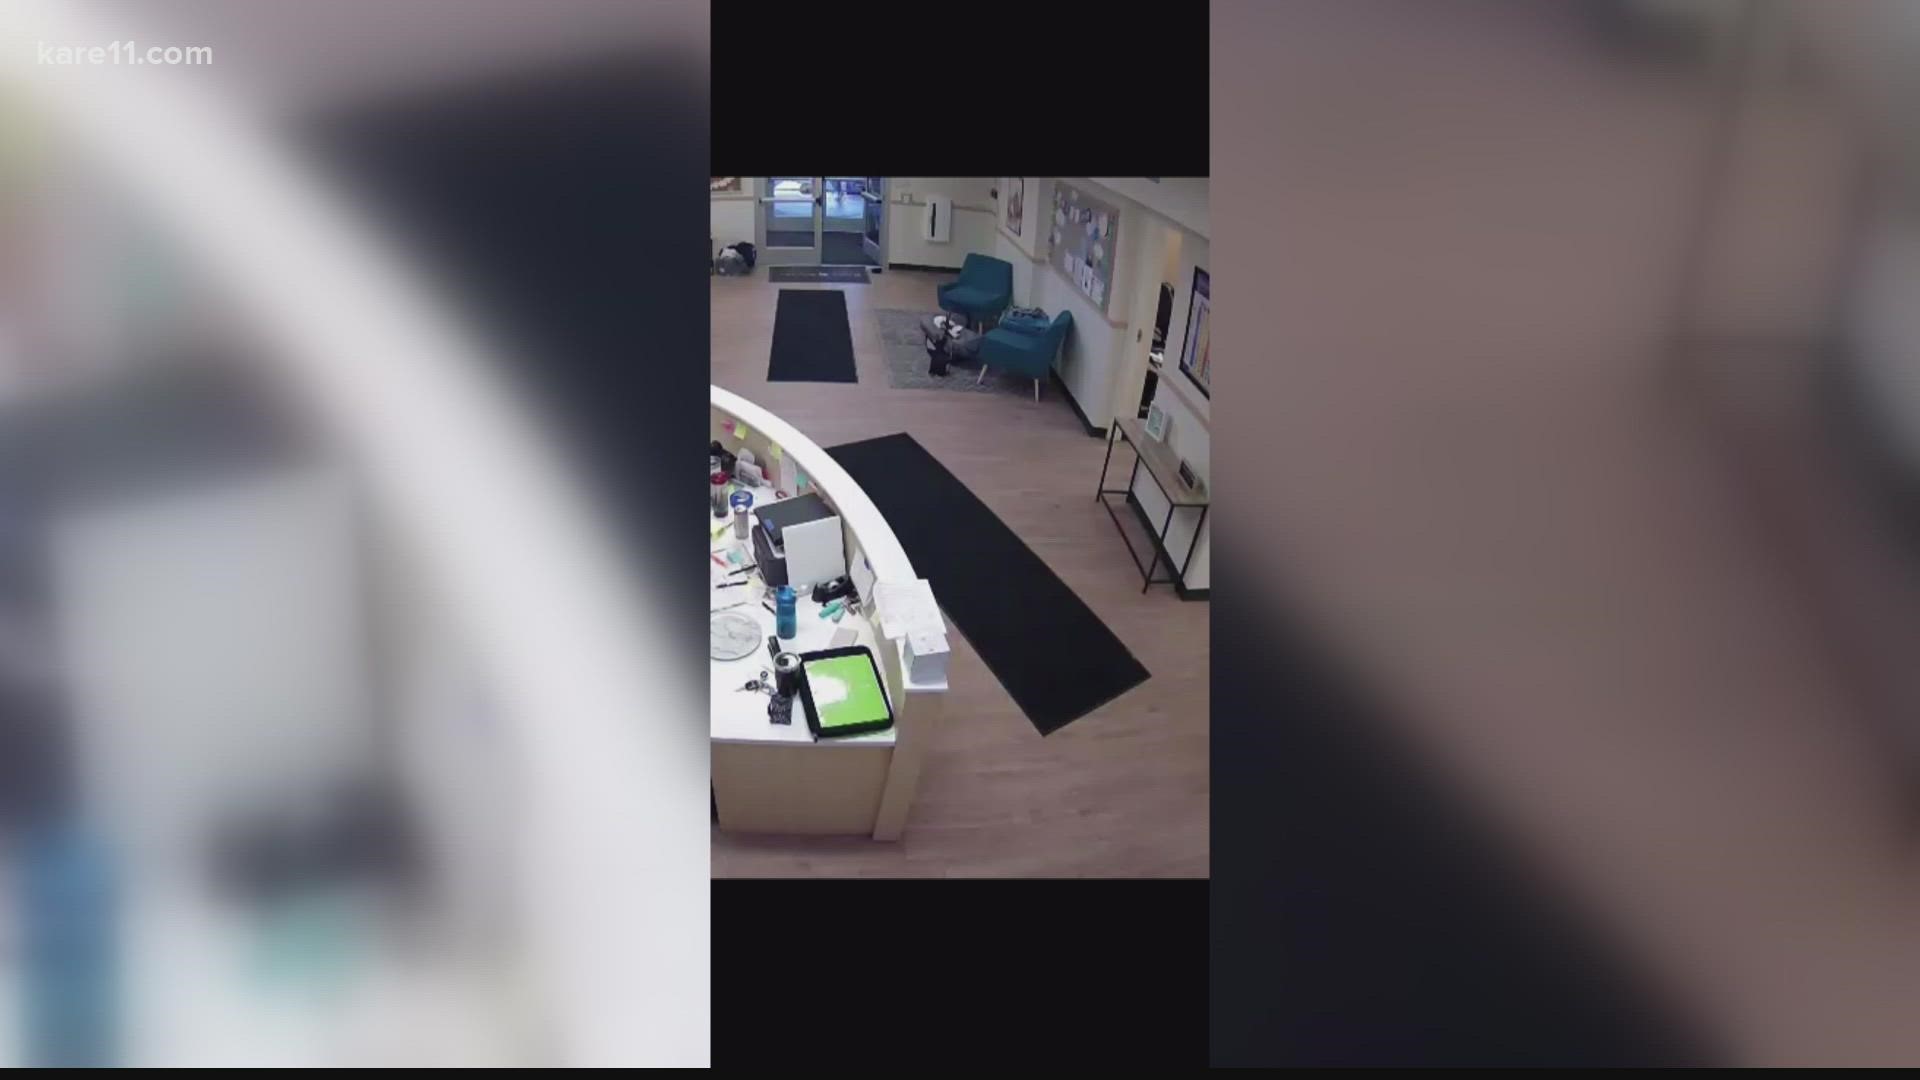 An woman nearly had her car stolen when she was at a child care center in Edina on Wednesday.